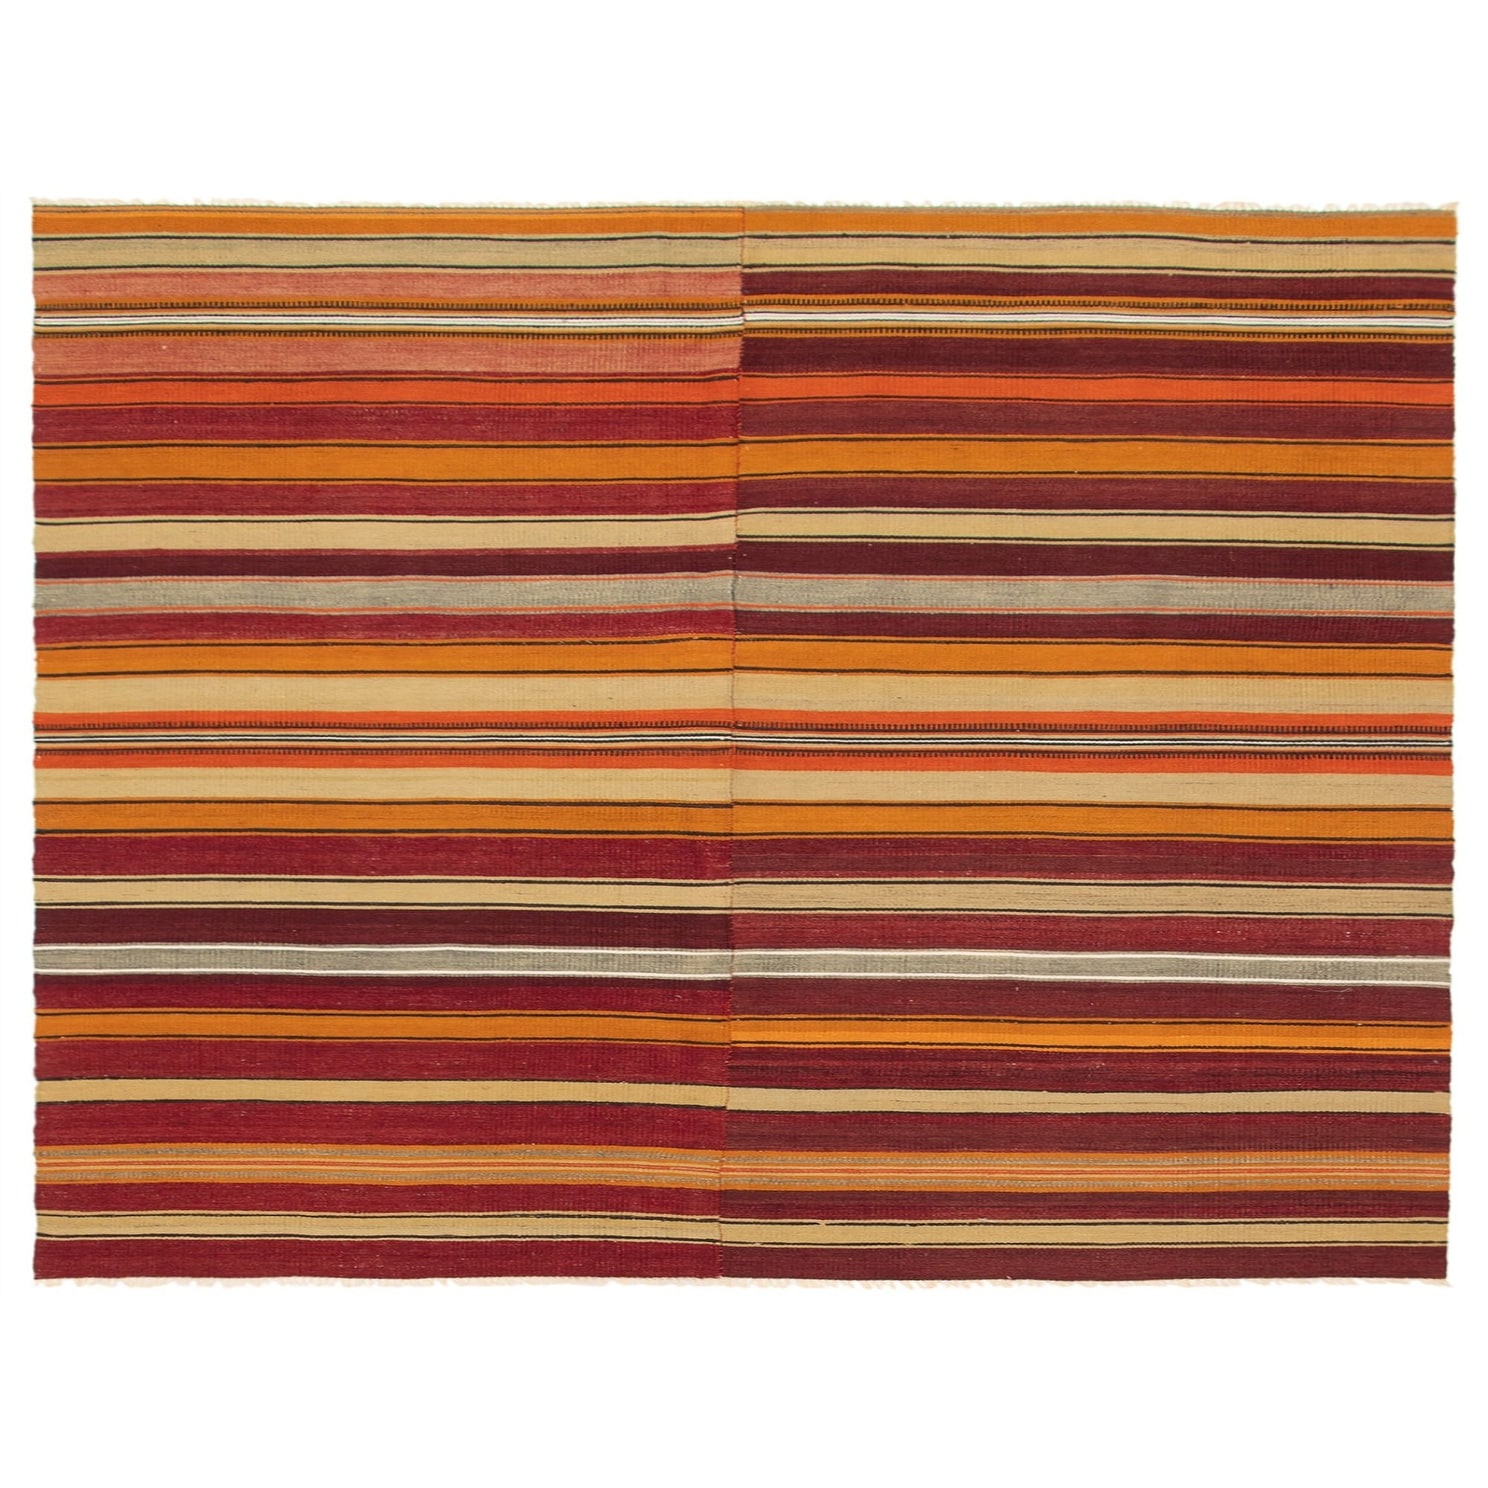 Bedroom eCarpet Gallery Area Rug for Living Room 346071 Kalista Flat-Weaves & Kilims Red Kilim 5'5 x 7'9 Hand-Knotted Wool Rug 